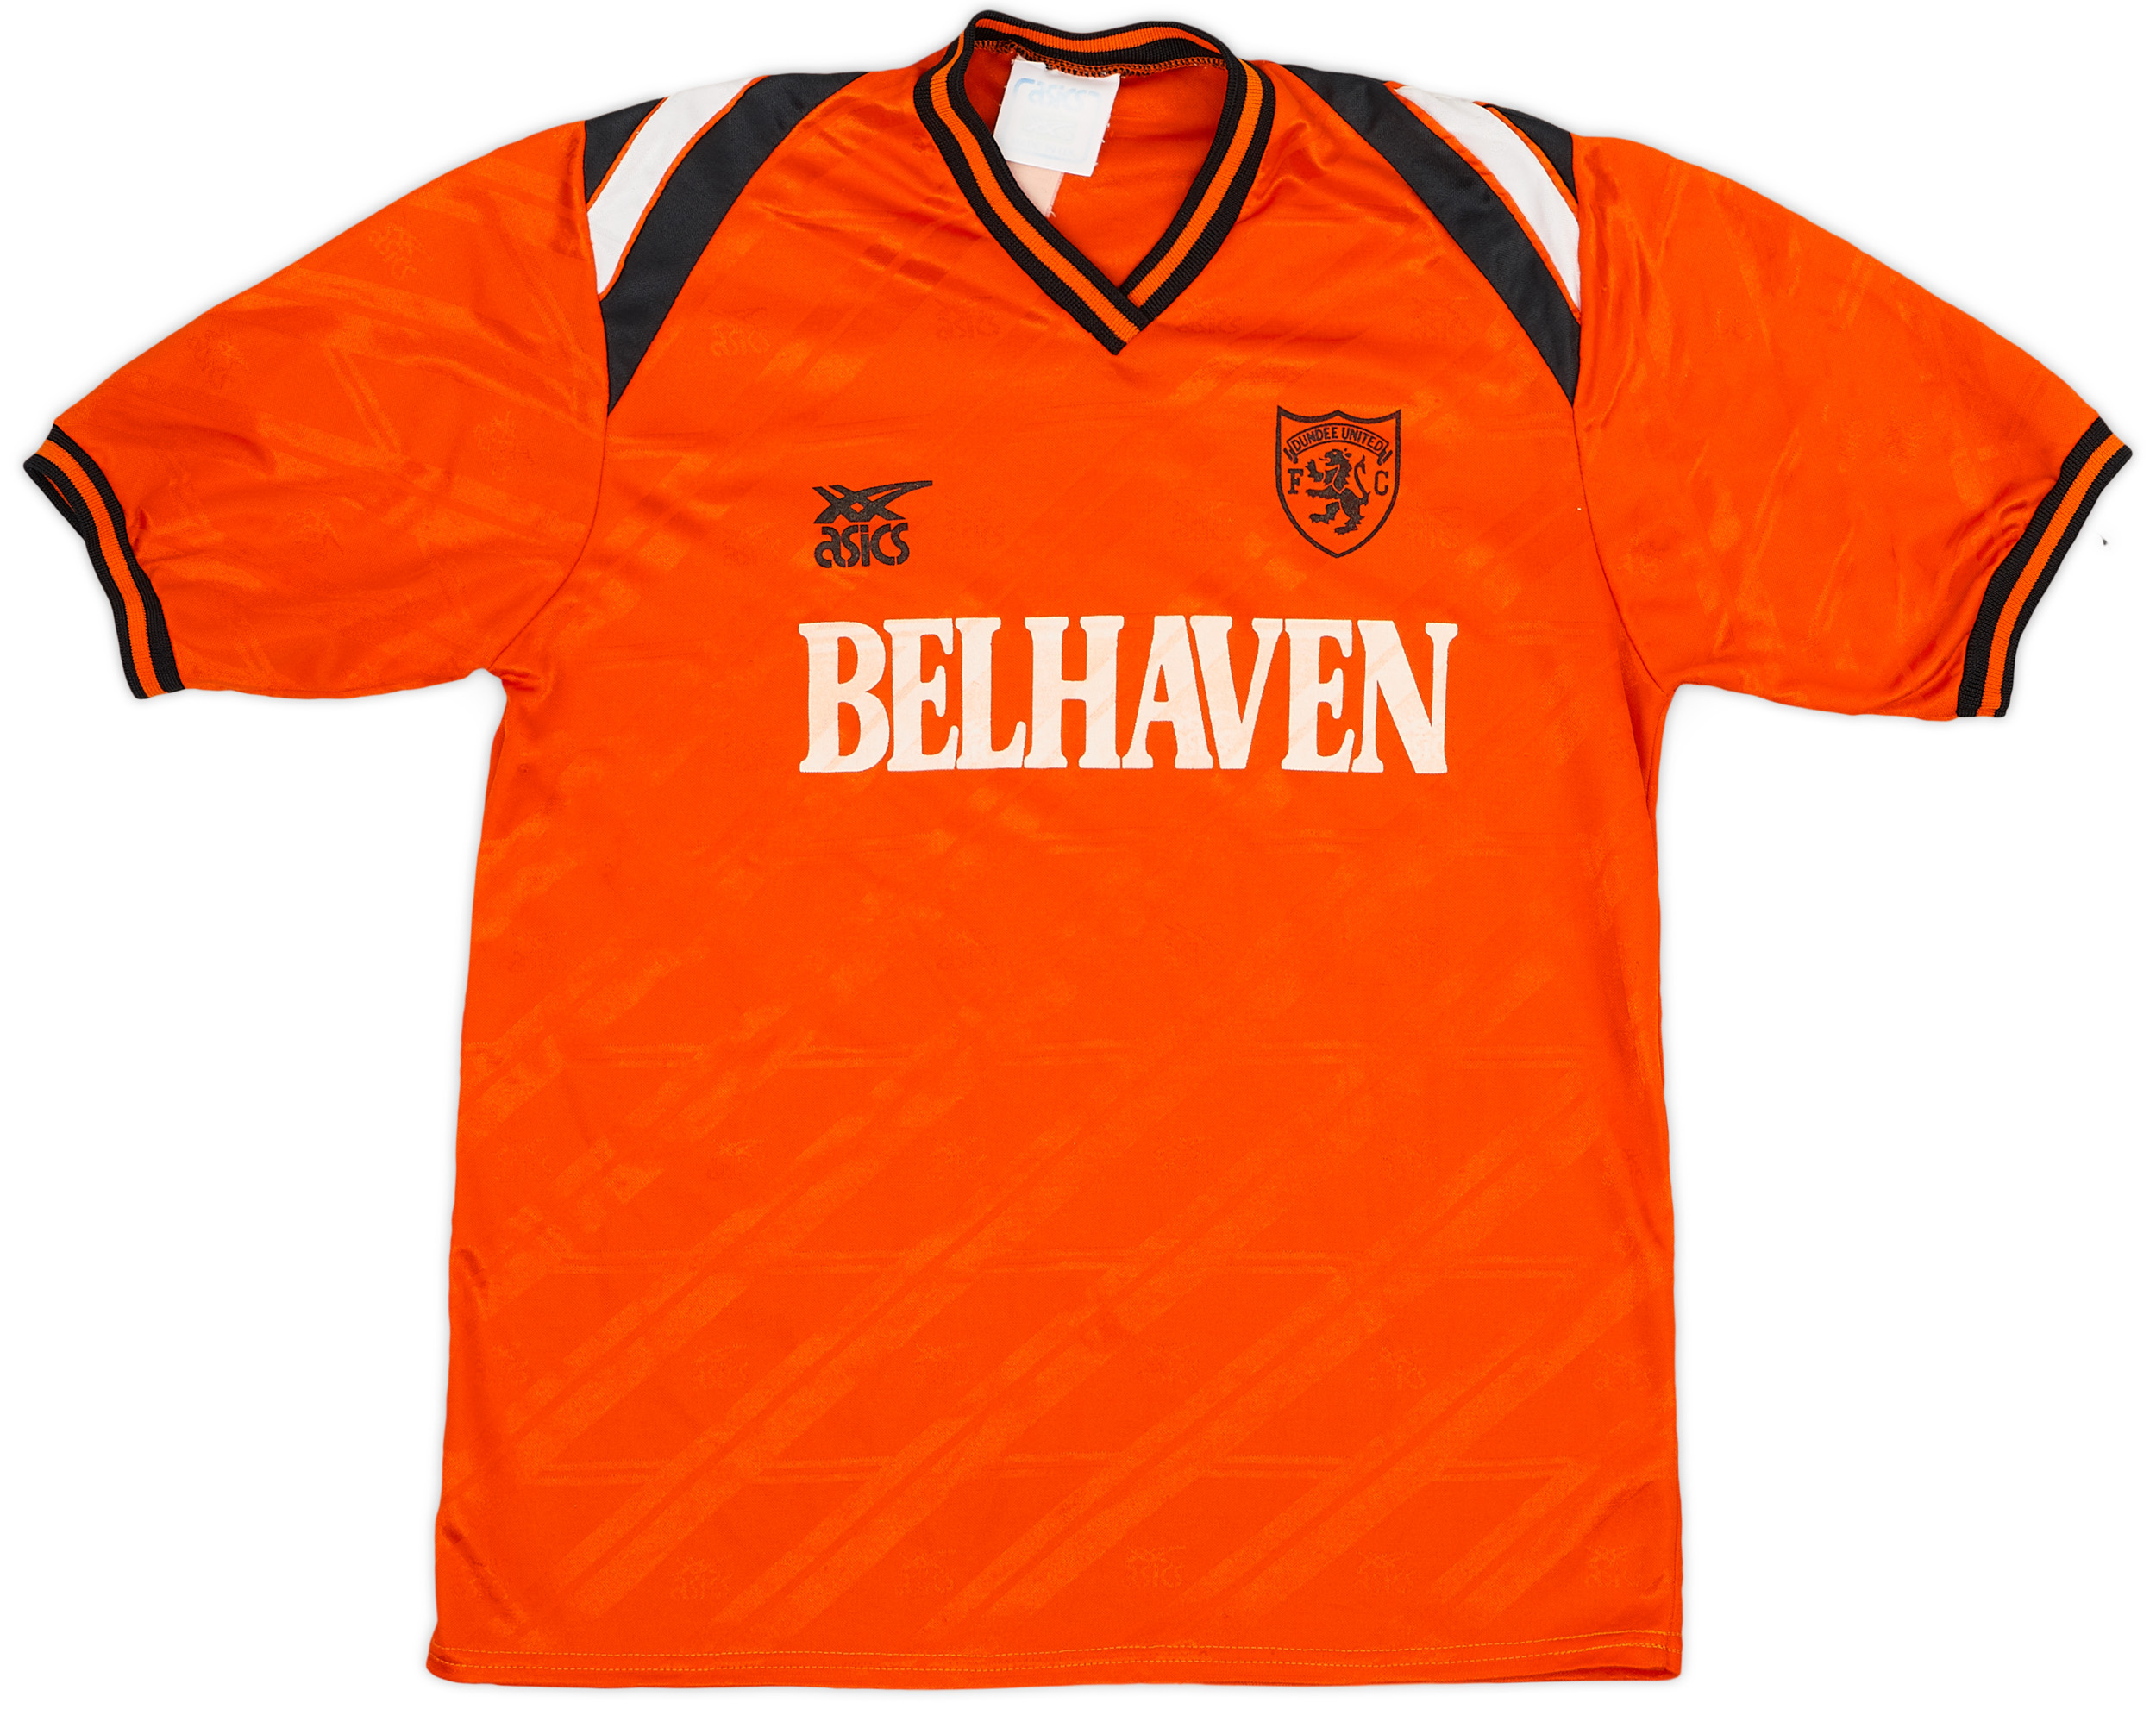 1989-91 Dundee United Home Shirt - 8/10 - ()